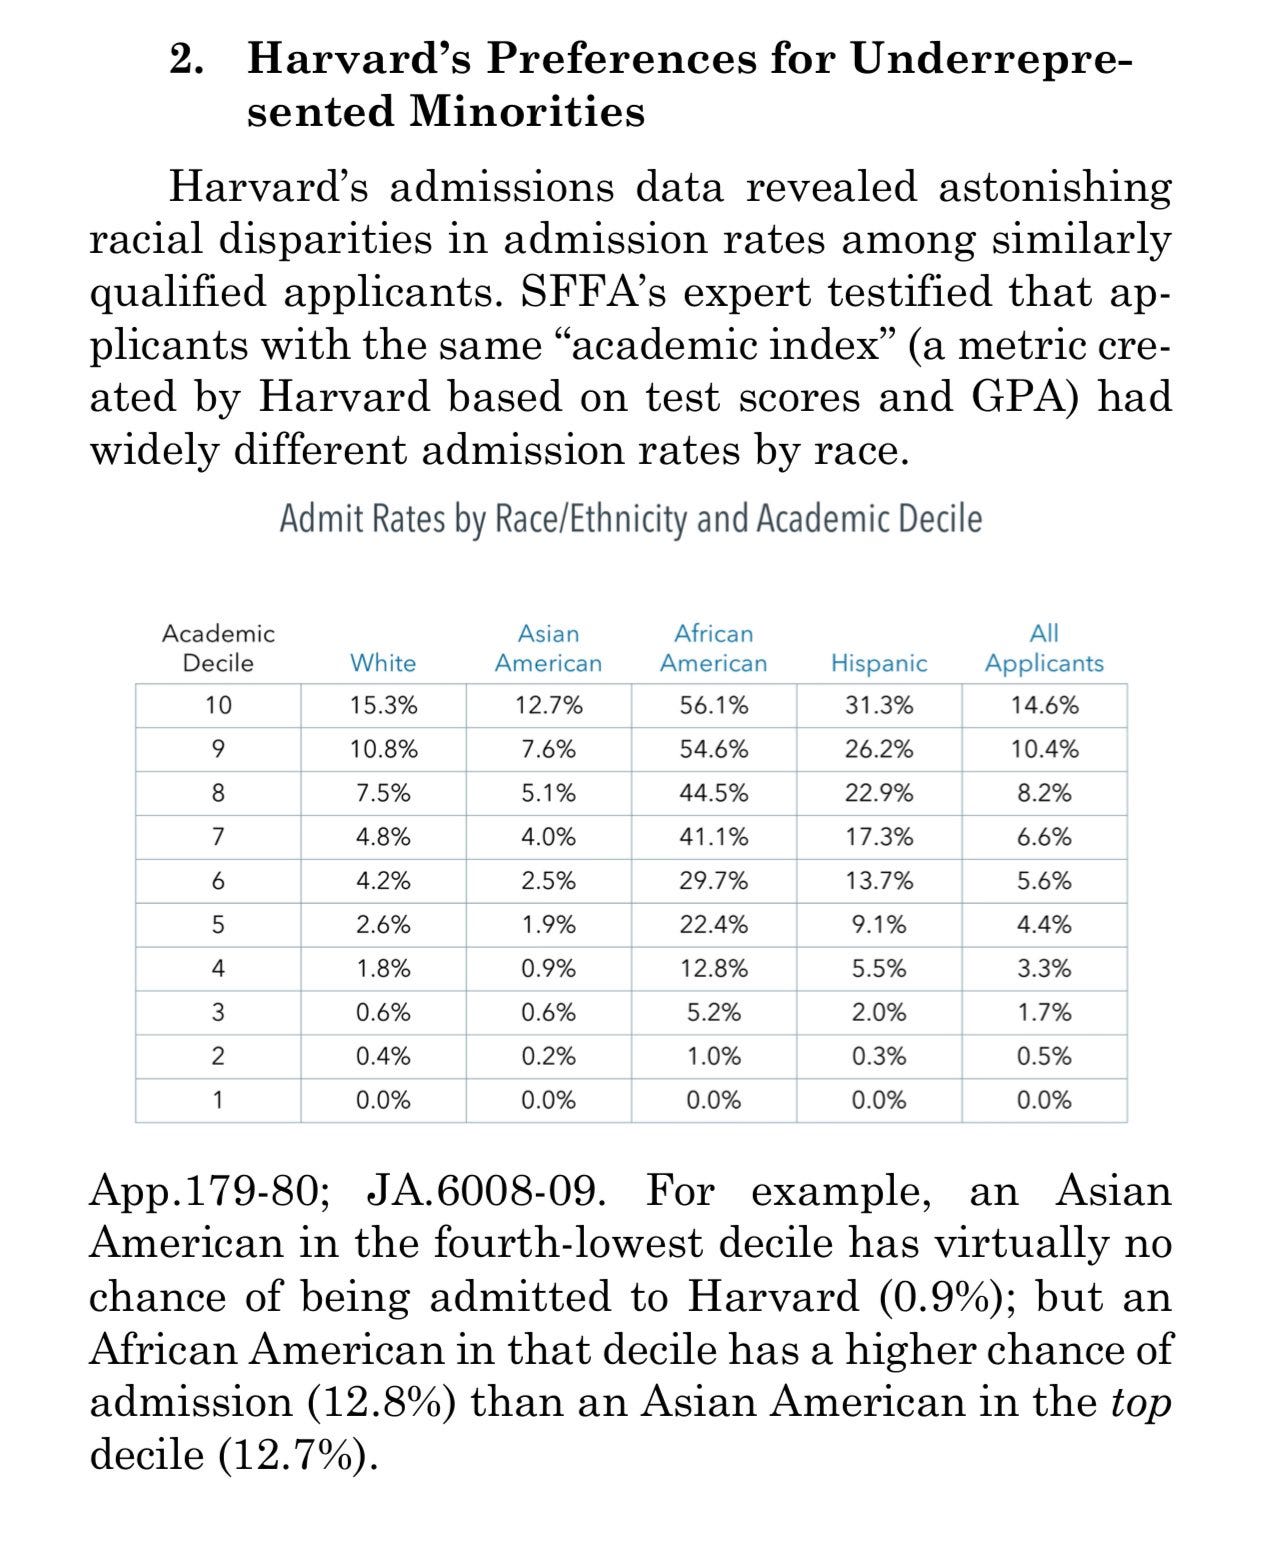 r/JoeRogan - Admit Rates by Race/Ethnicity and Academic Decile in Harvard